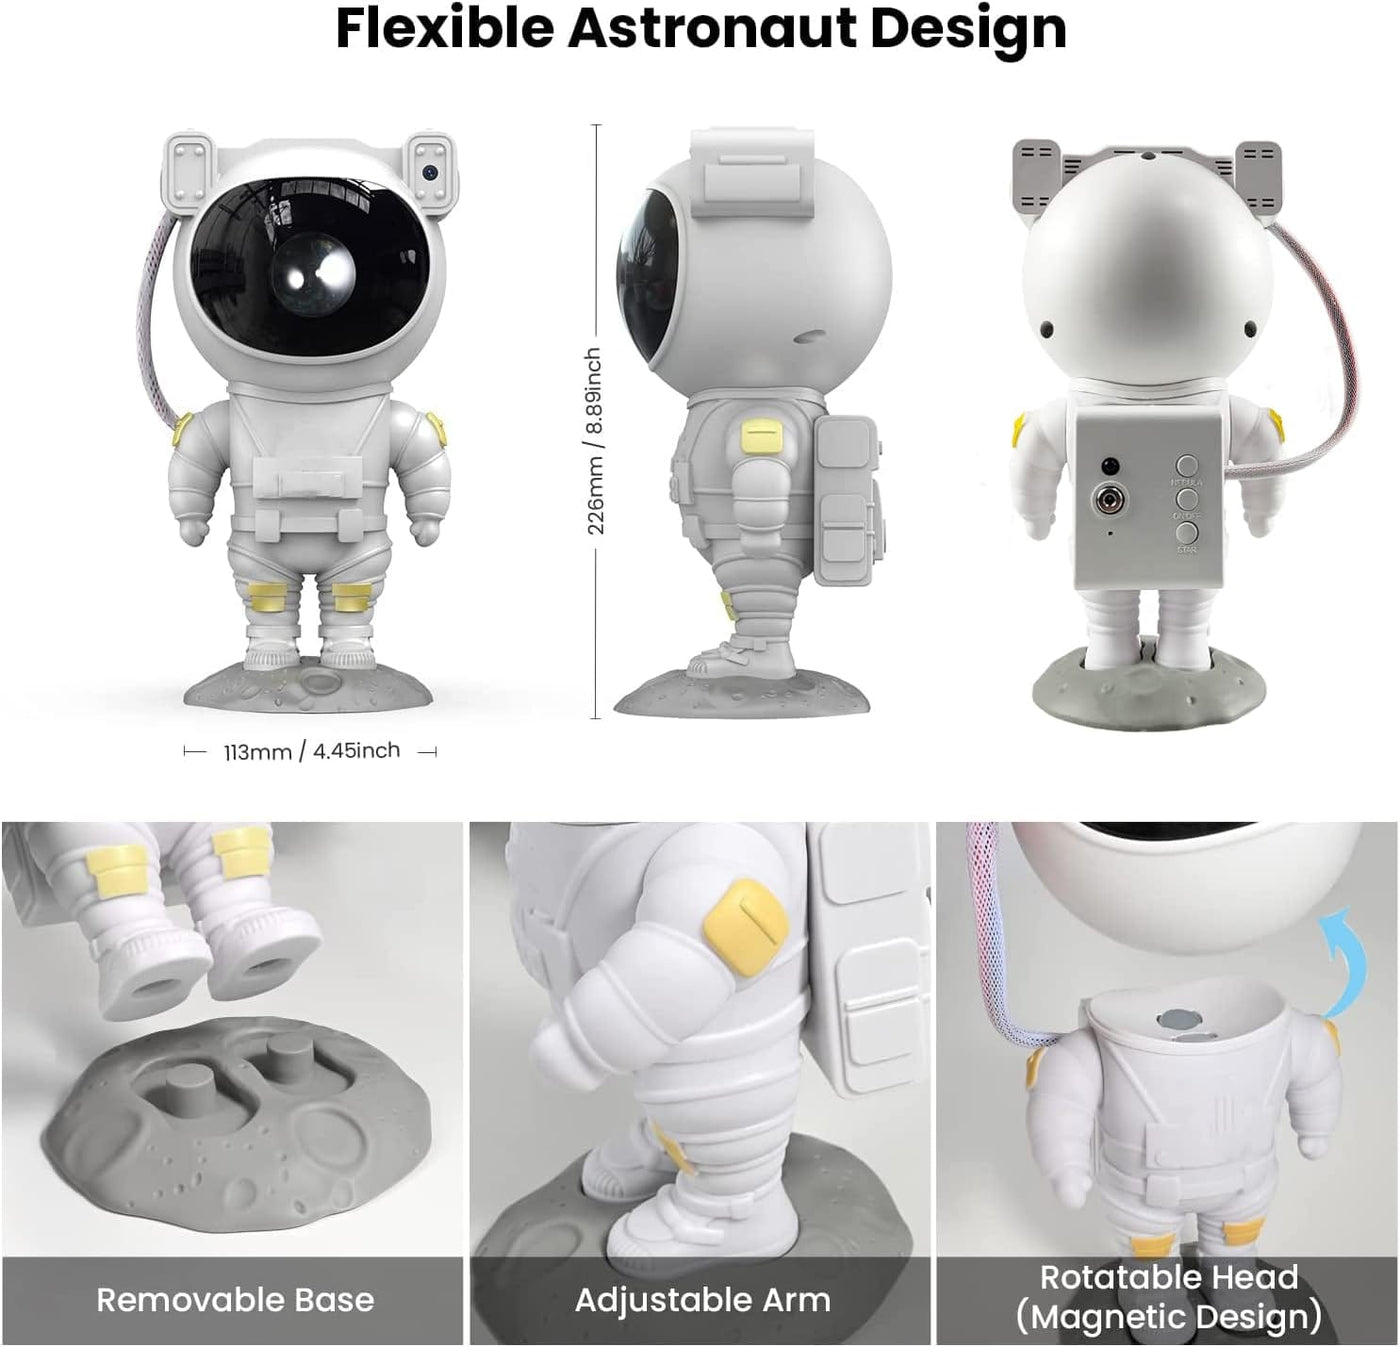 Dubkart Lights Star Astronaut Night Light Projector with Remote Control Timer